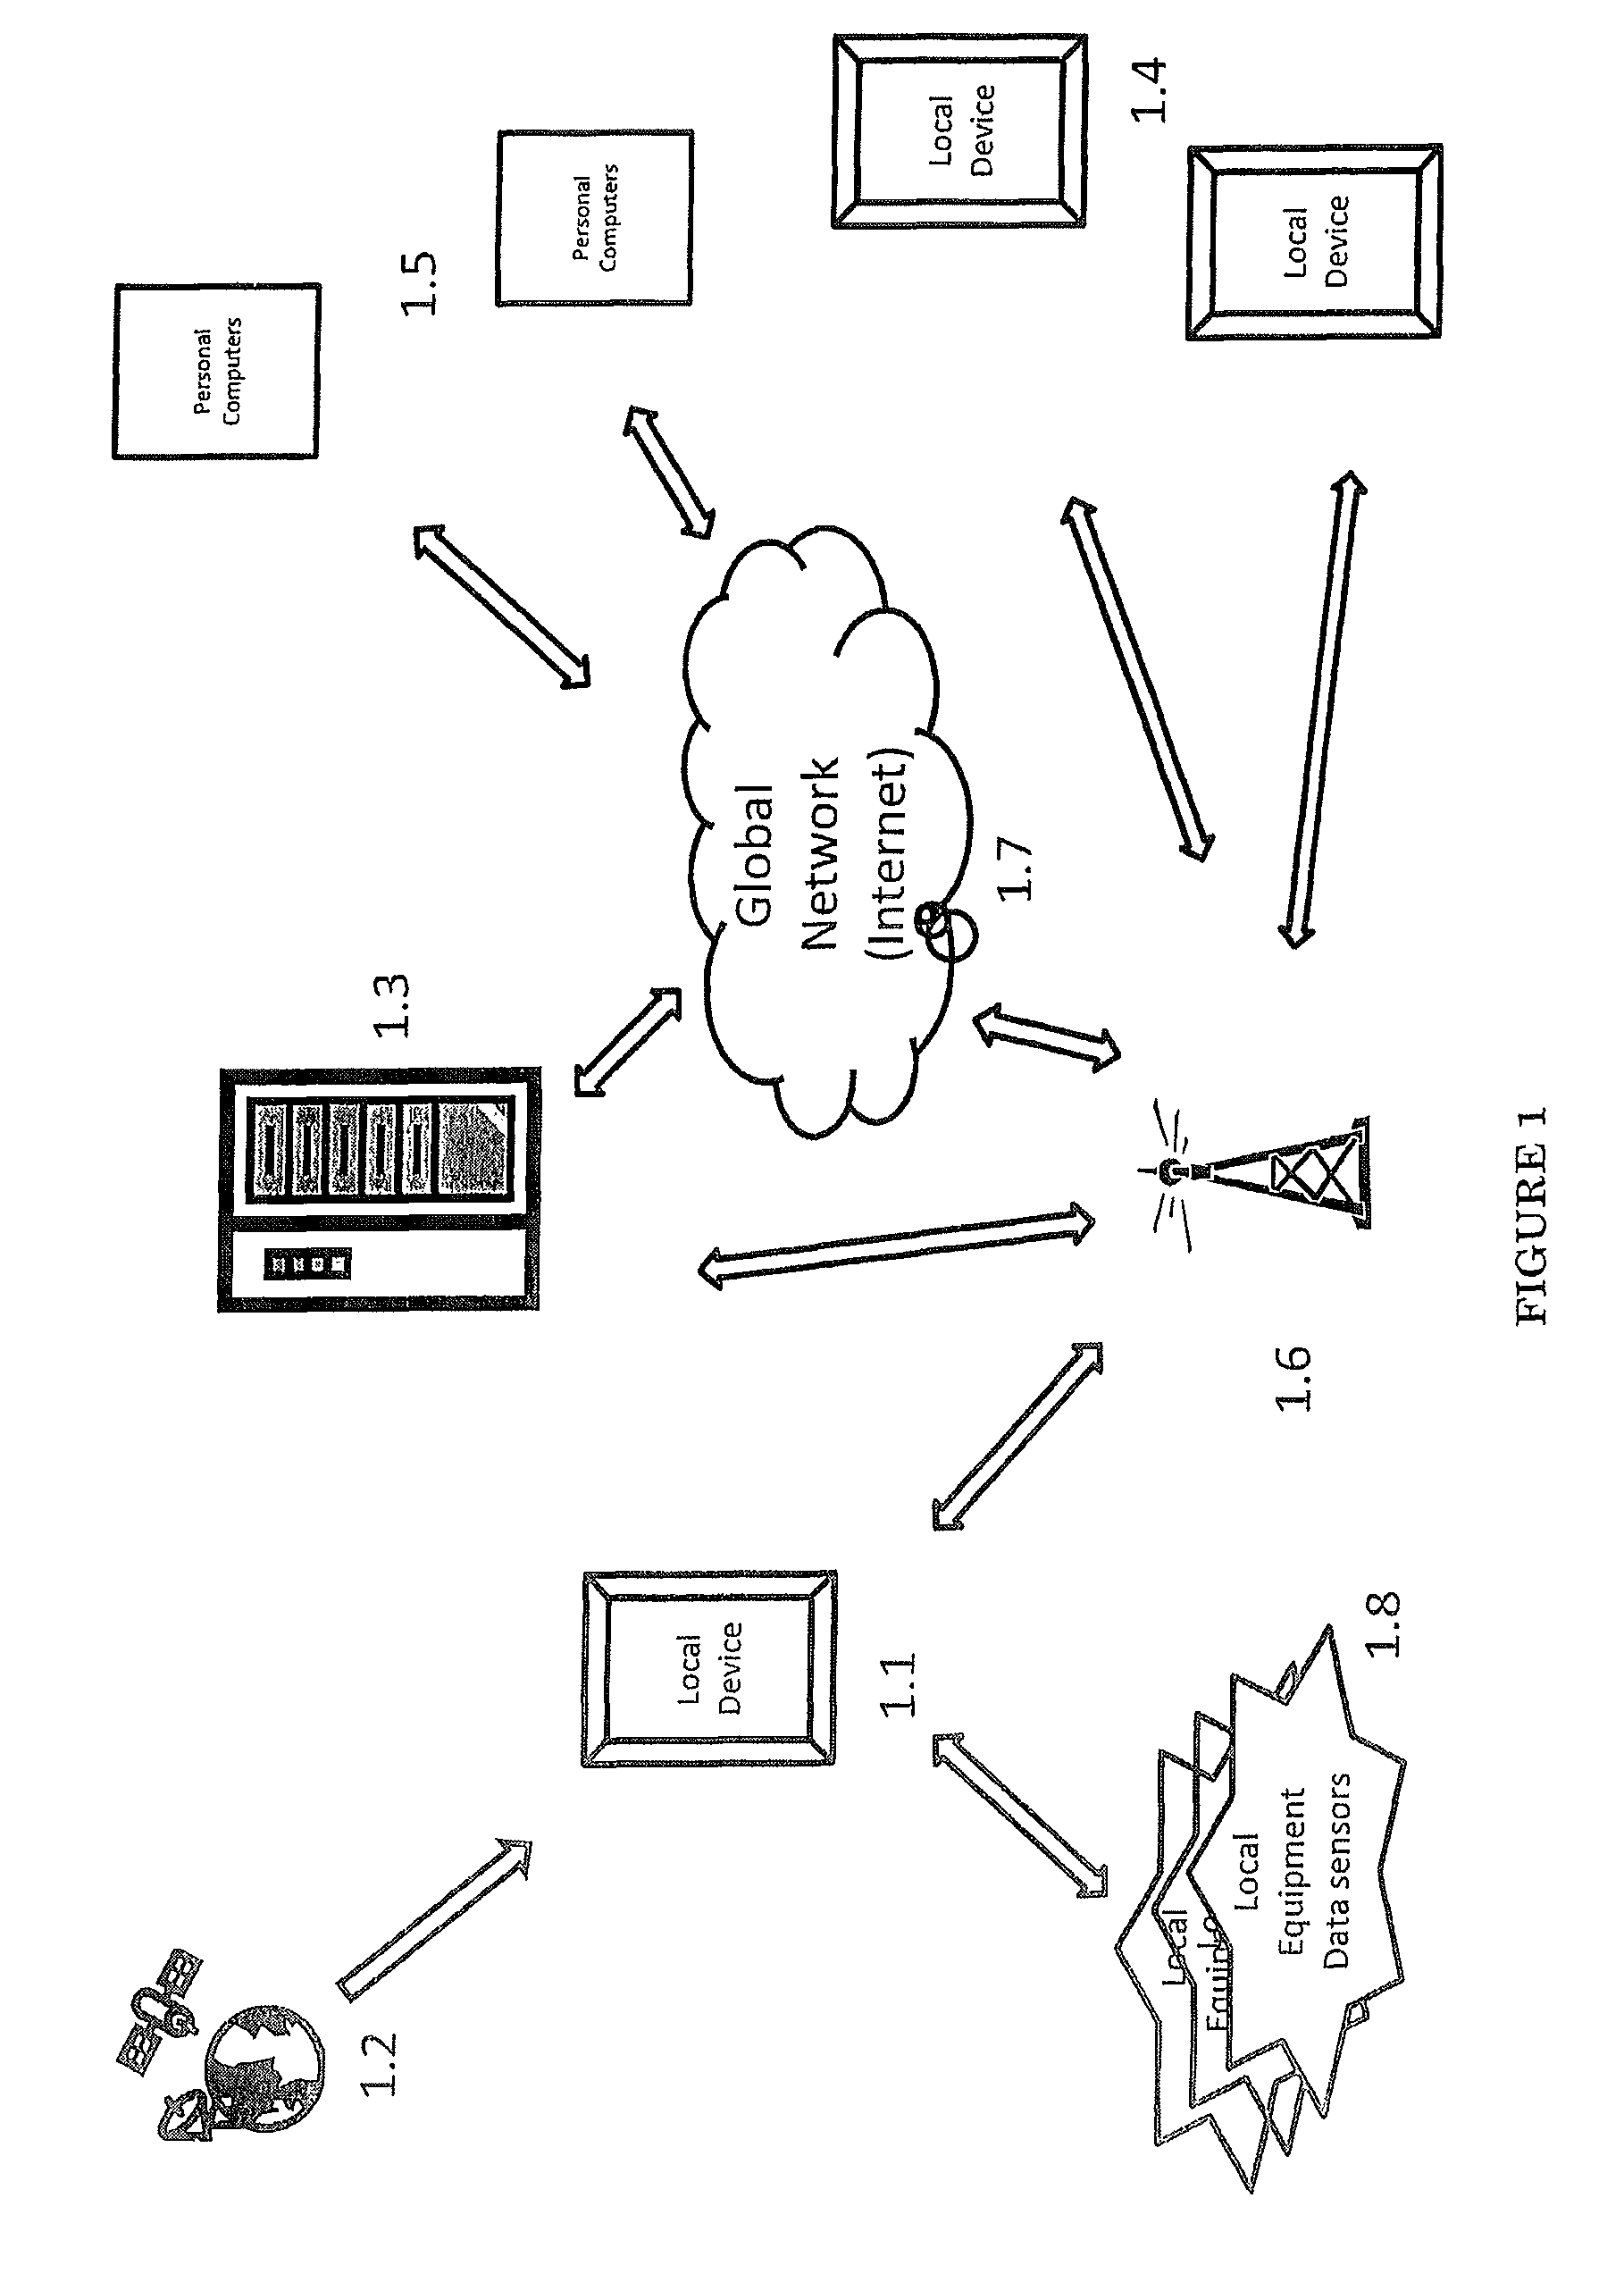 System and method for race participant tracking and reporting of associated data